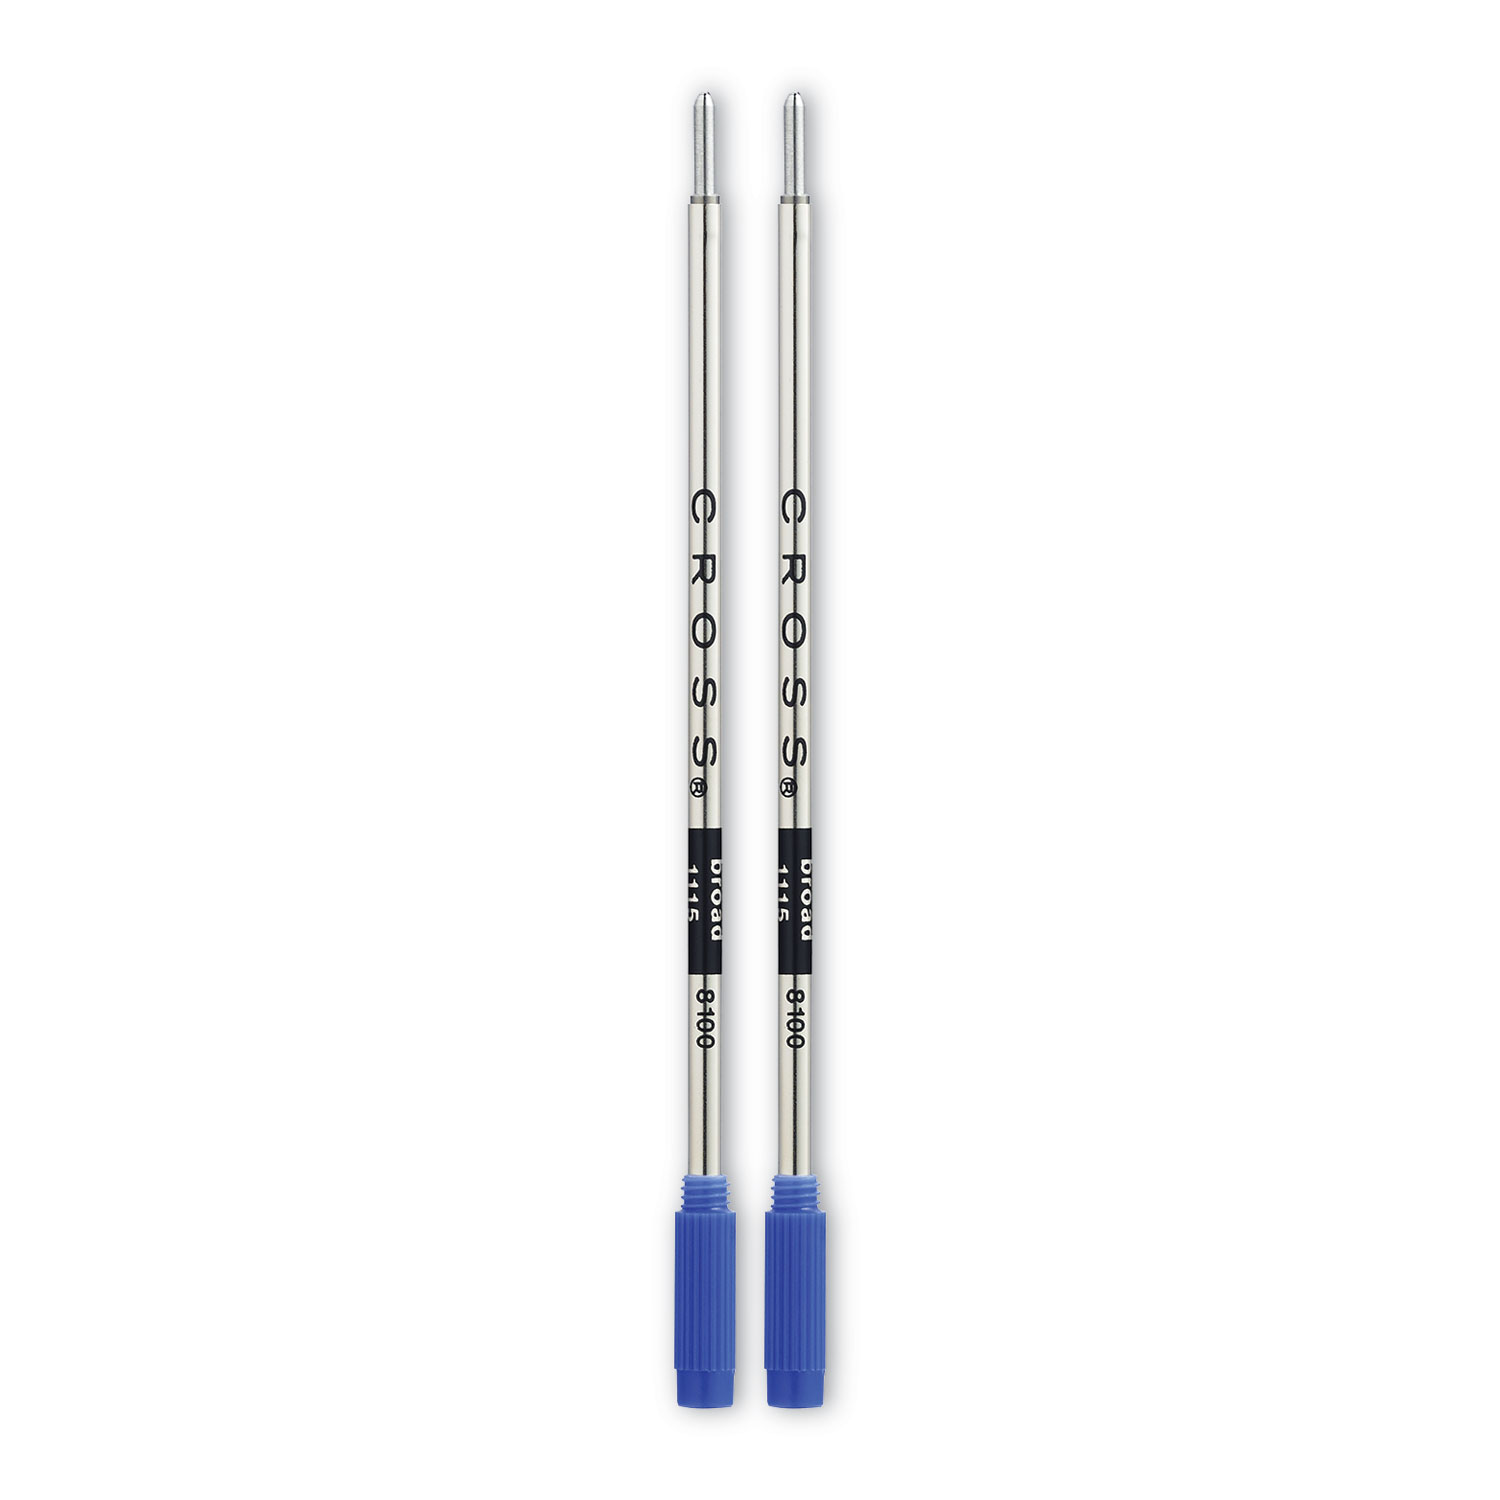 Cro81002 Refill for Cross Ballpoint Pens Broad Blue Ink 2/pack for sale online 